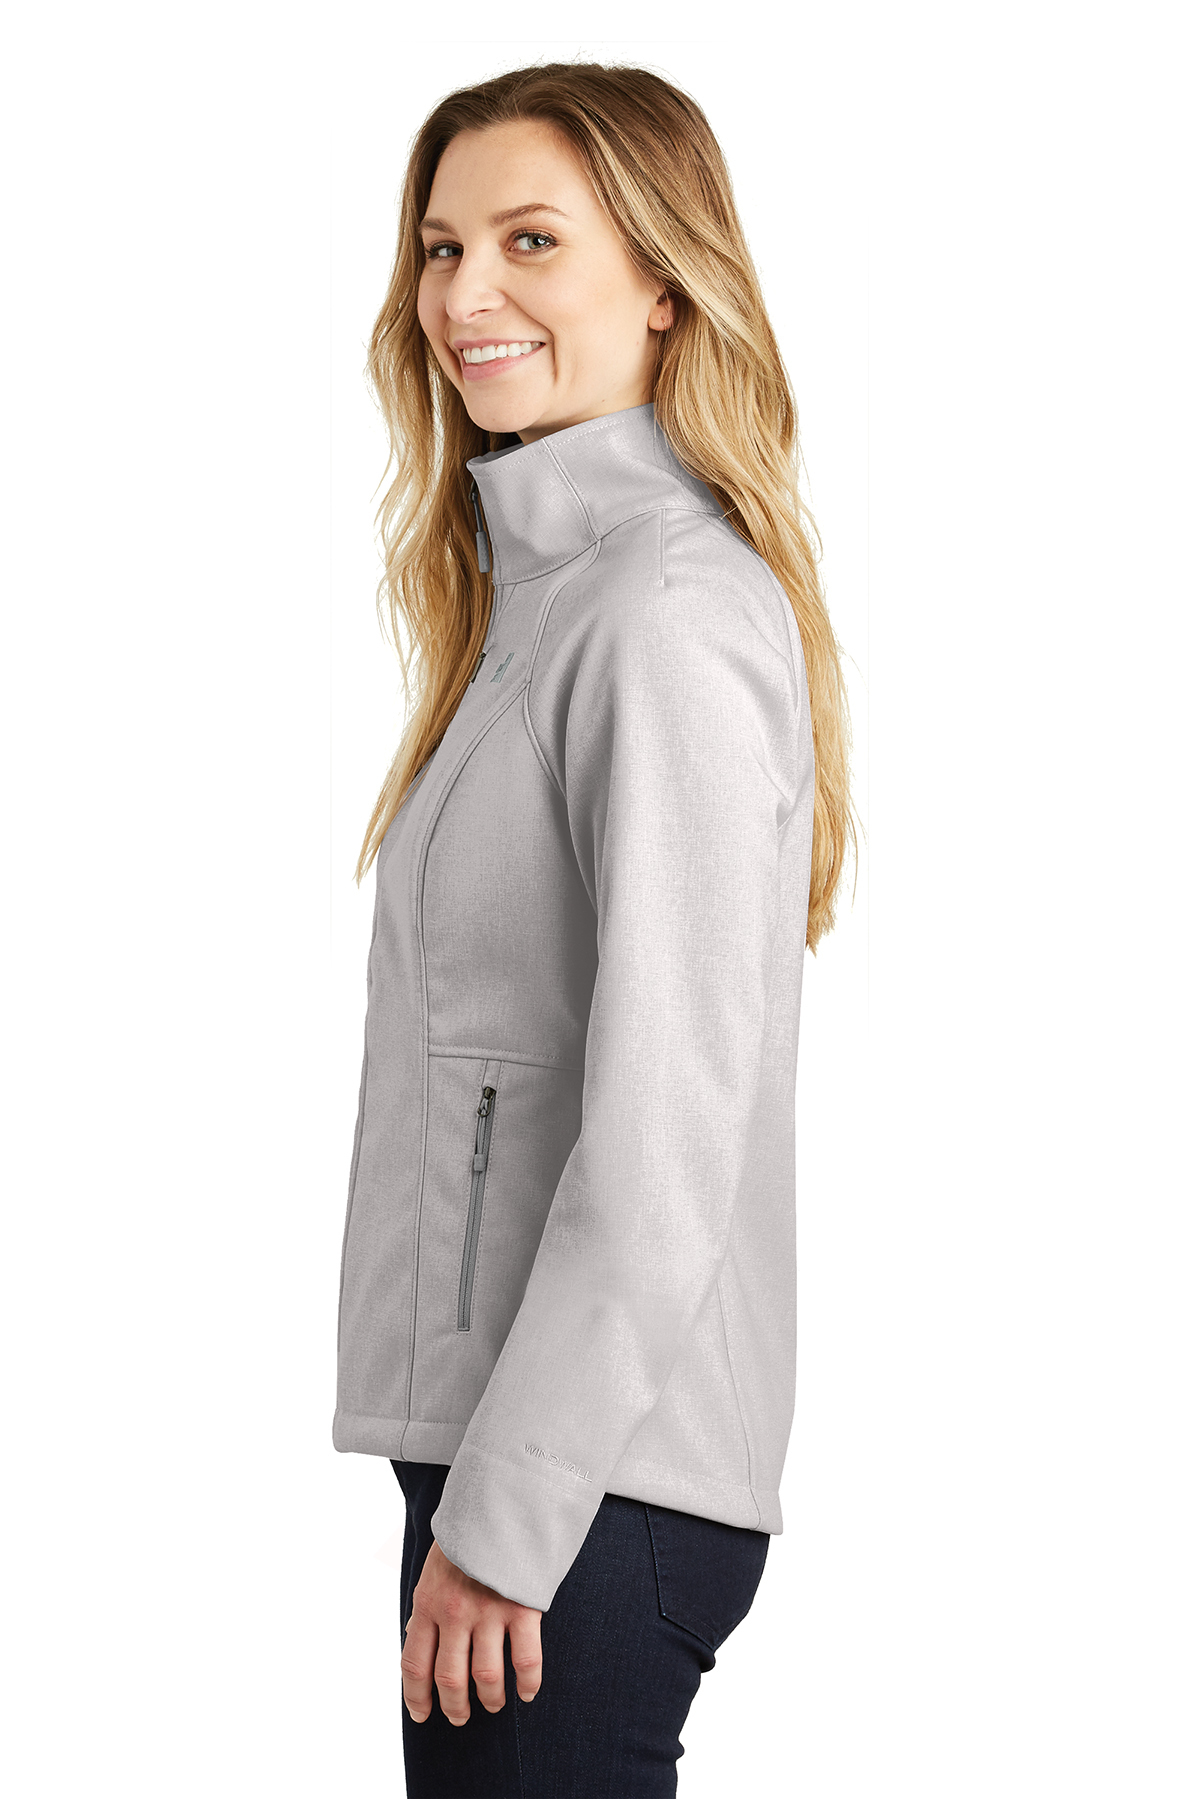 Ladies Apex Barrier Soft Shell Jacket 